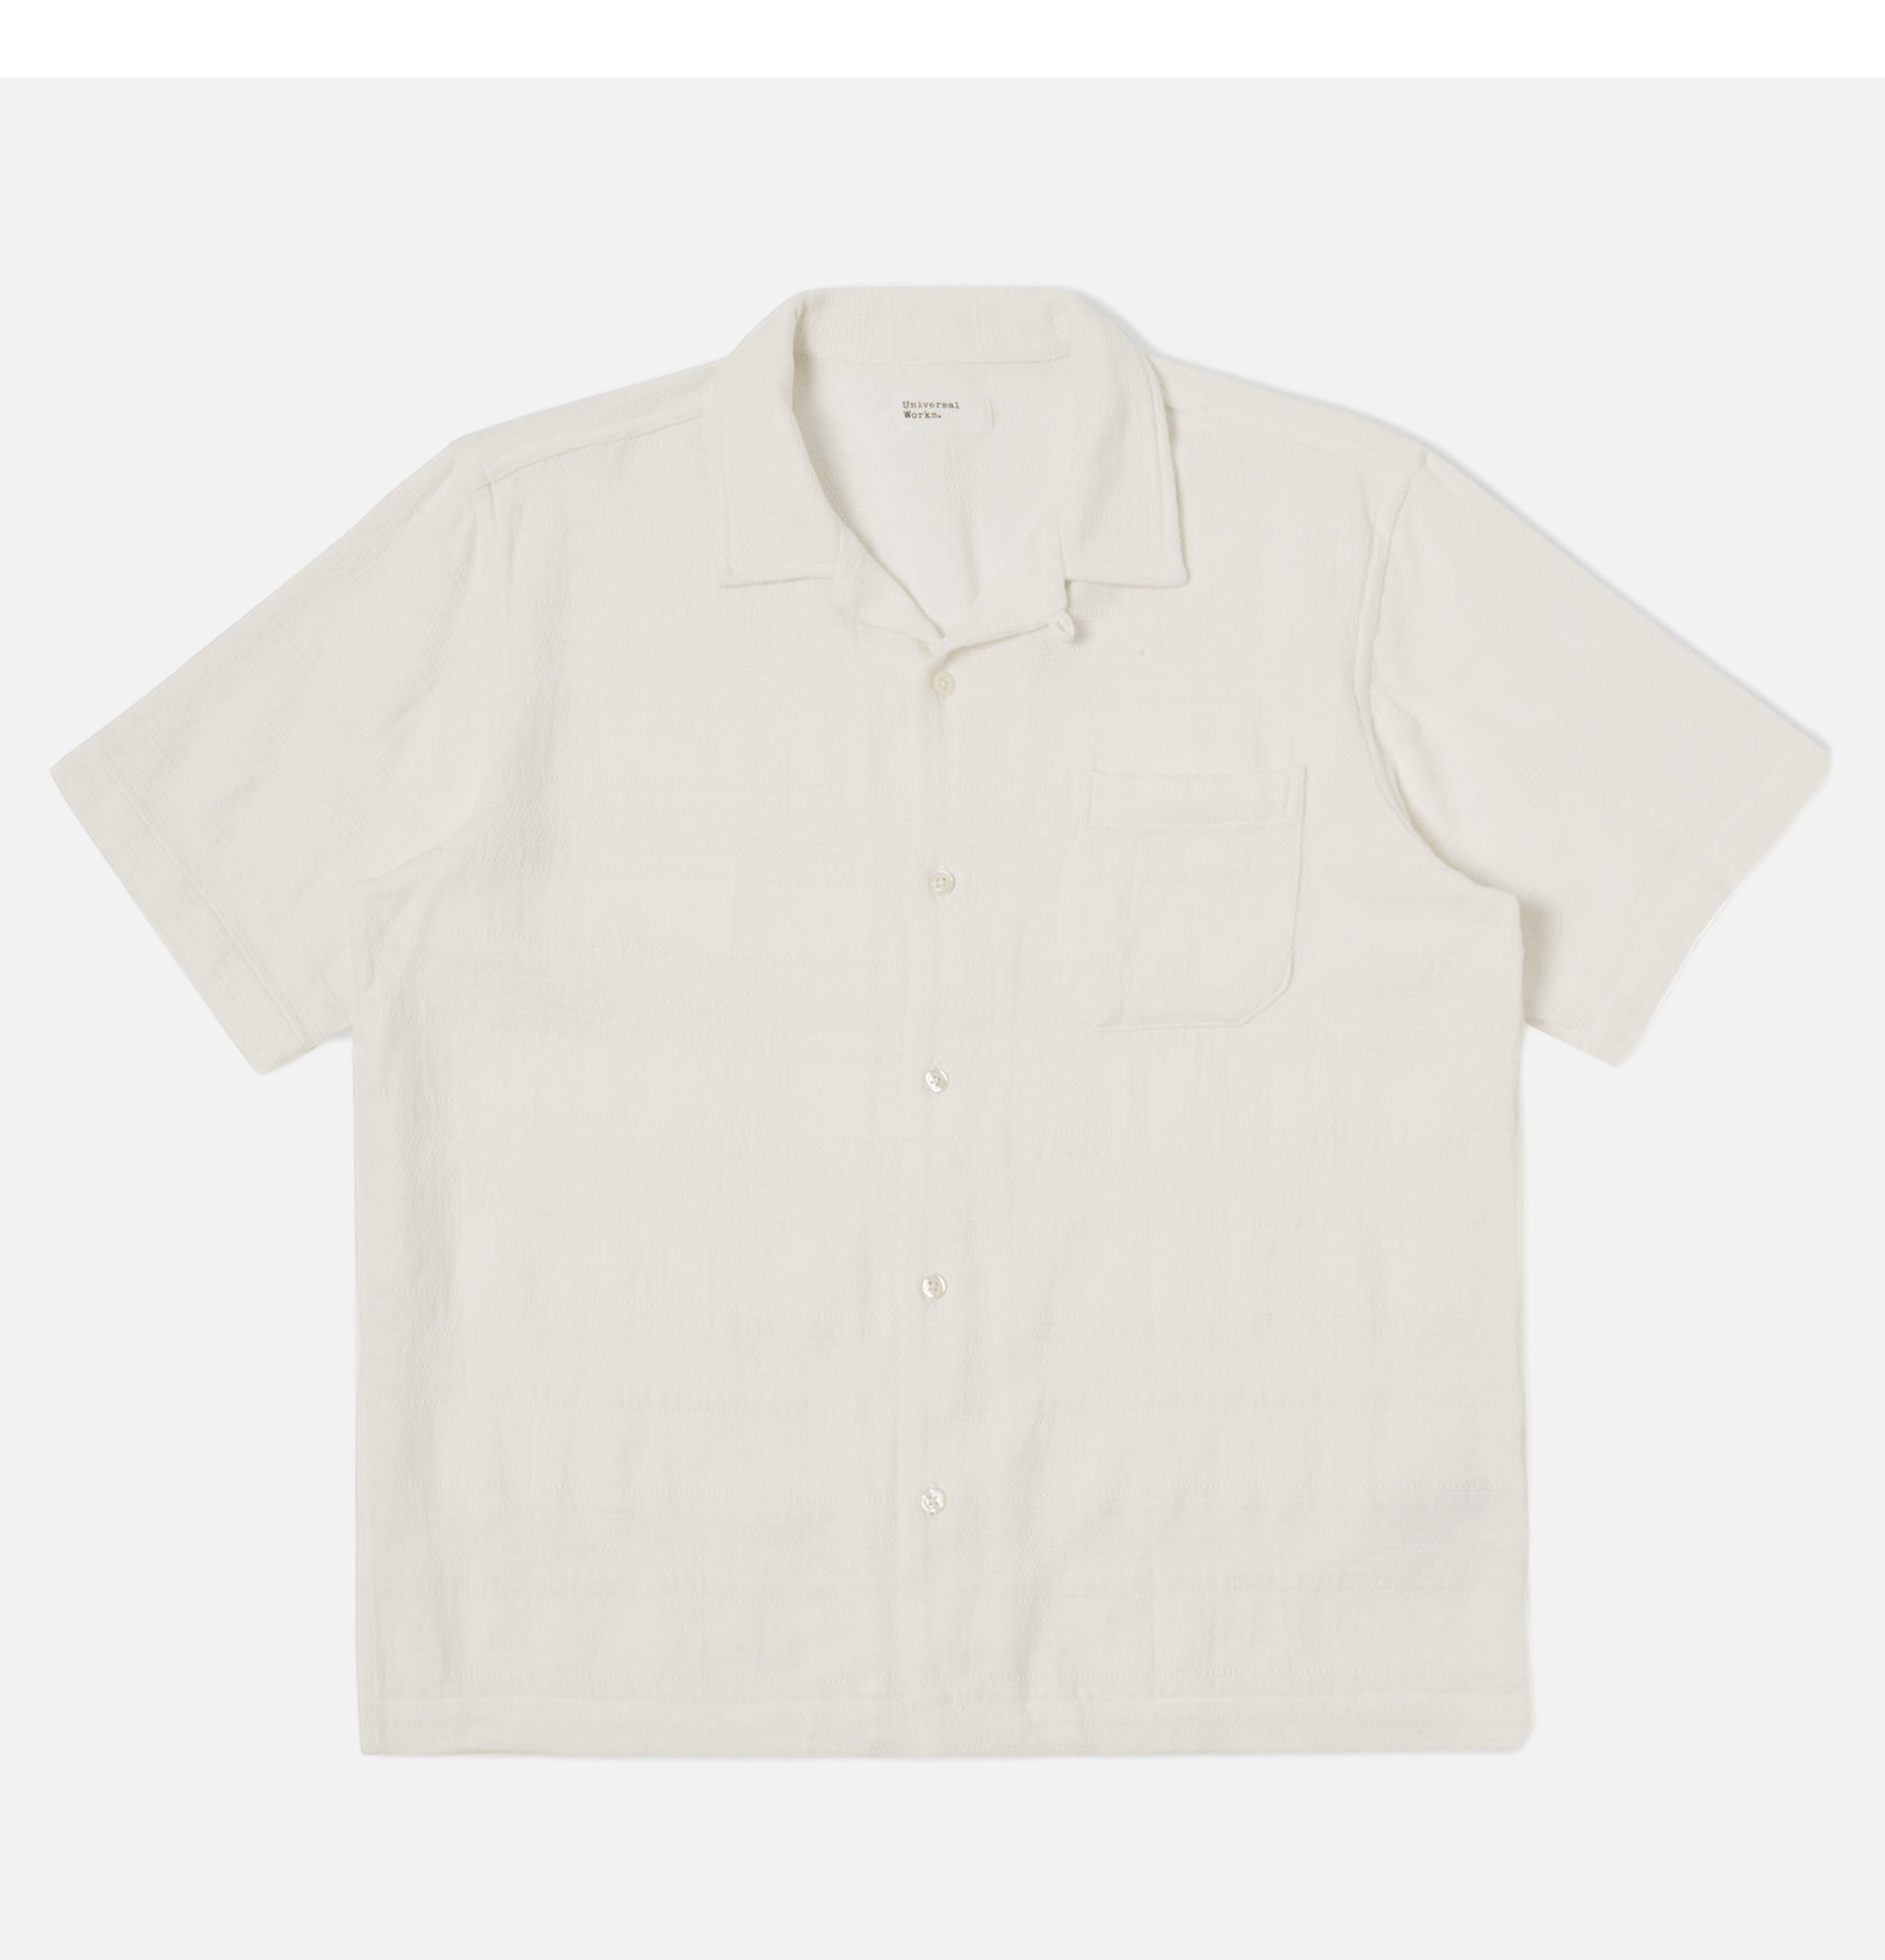 Universal Works Road shirt in white with Tipzzi stripes